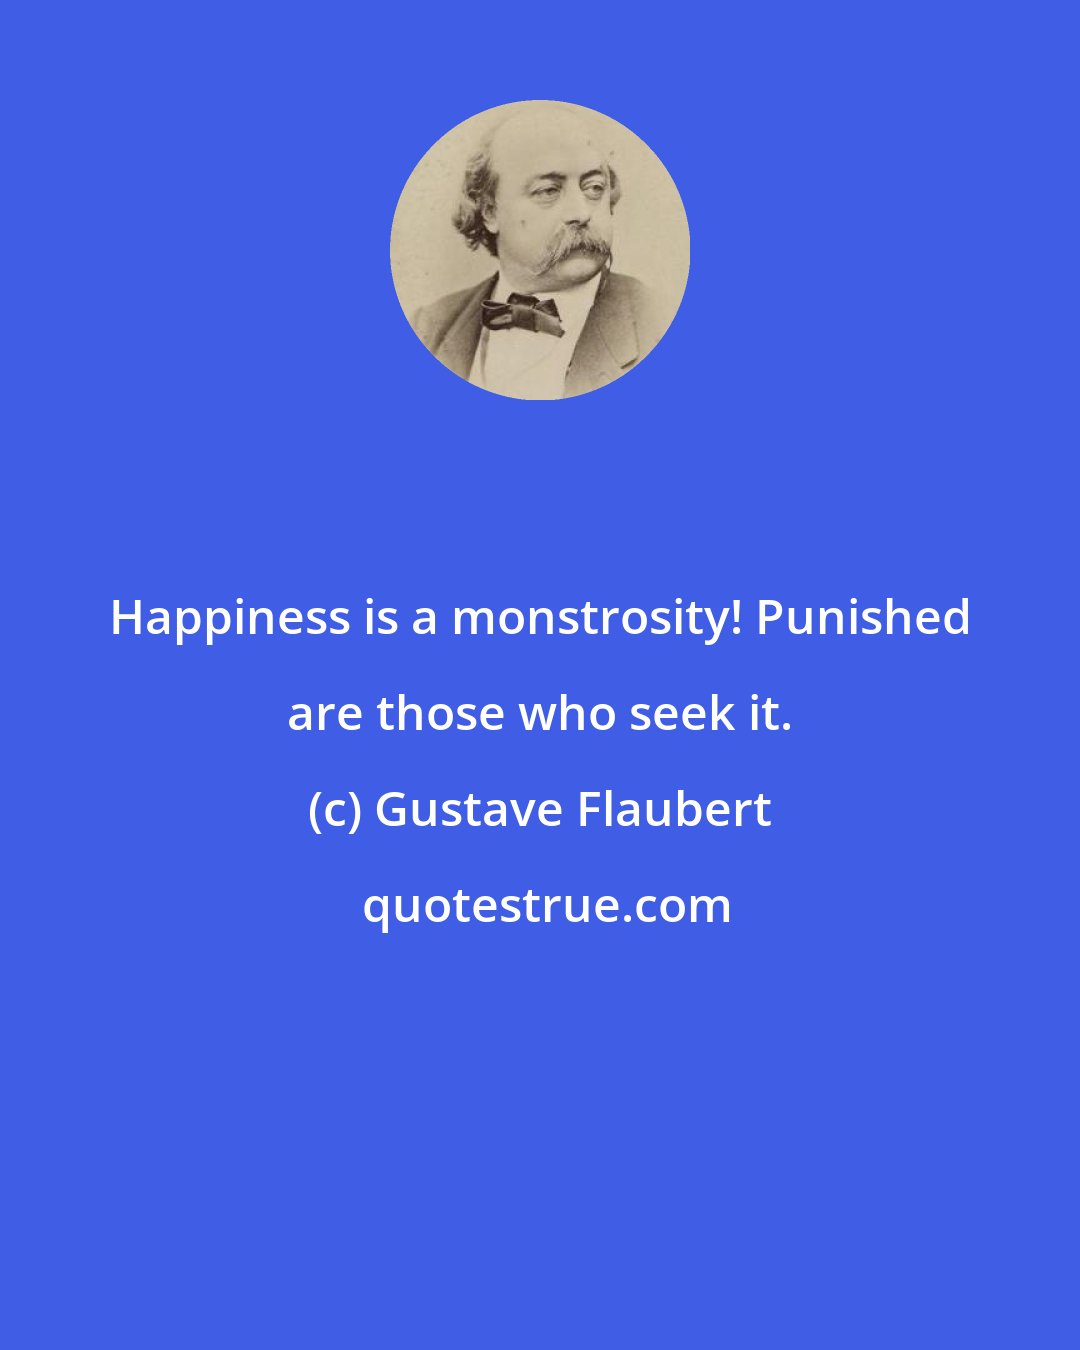 Gustave Flaubert: Happiness is a monstrosity! Punished are those who seek it.